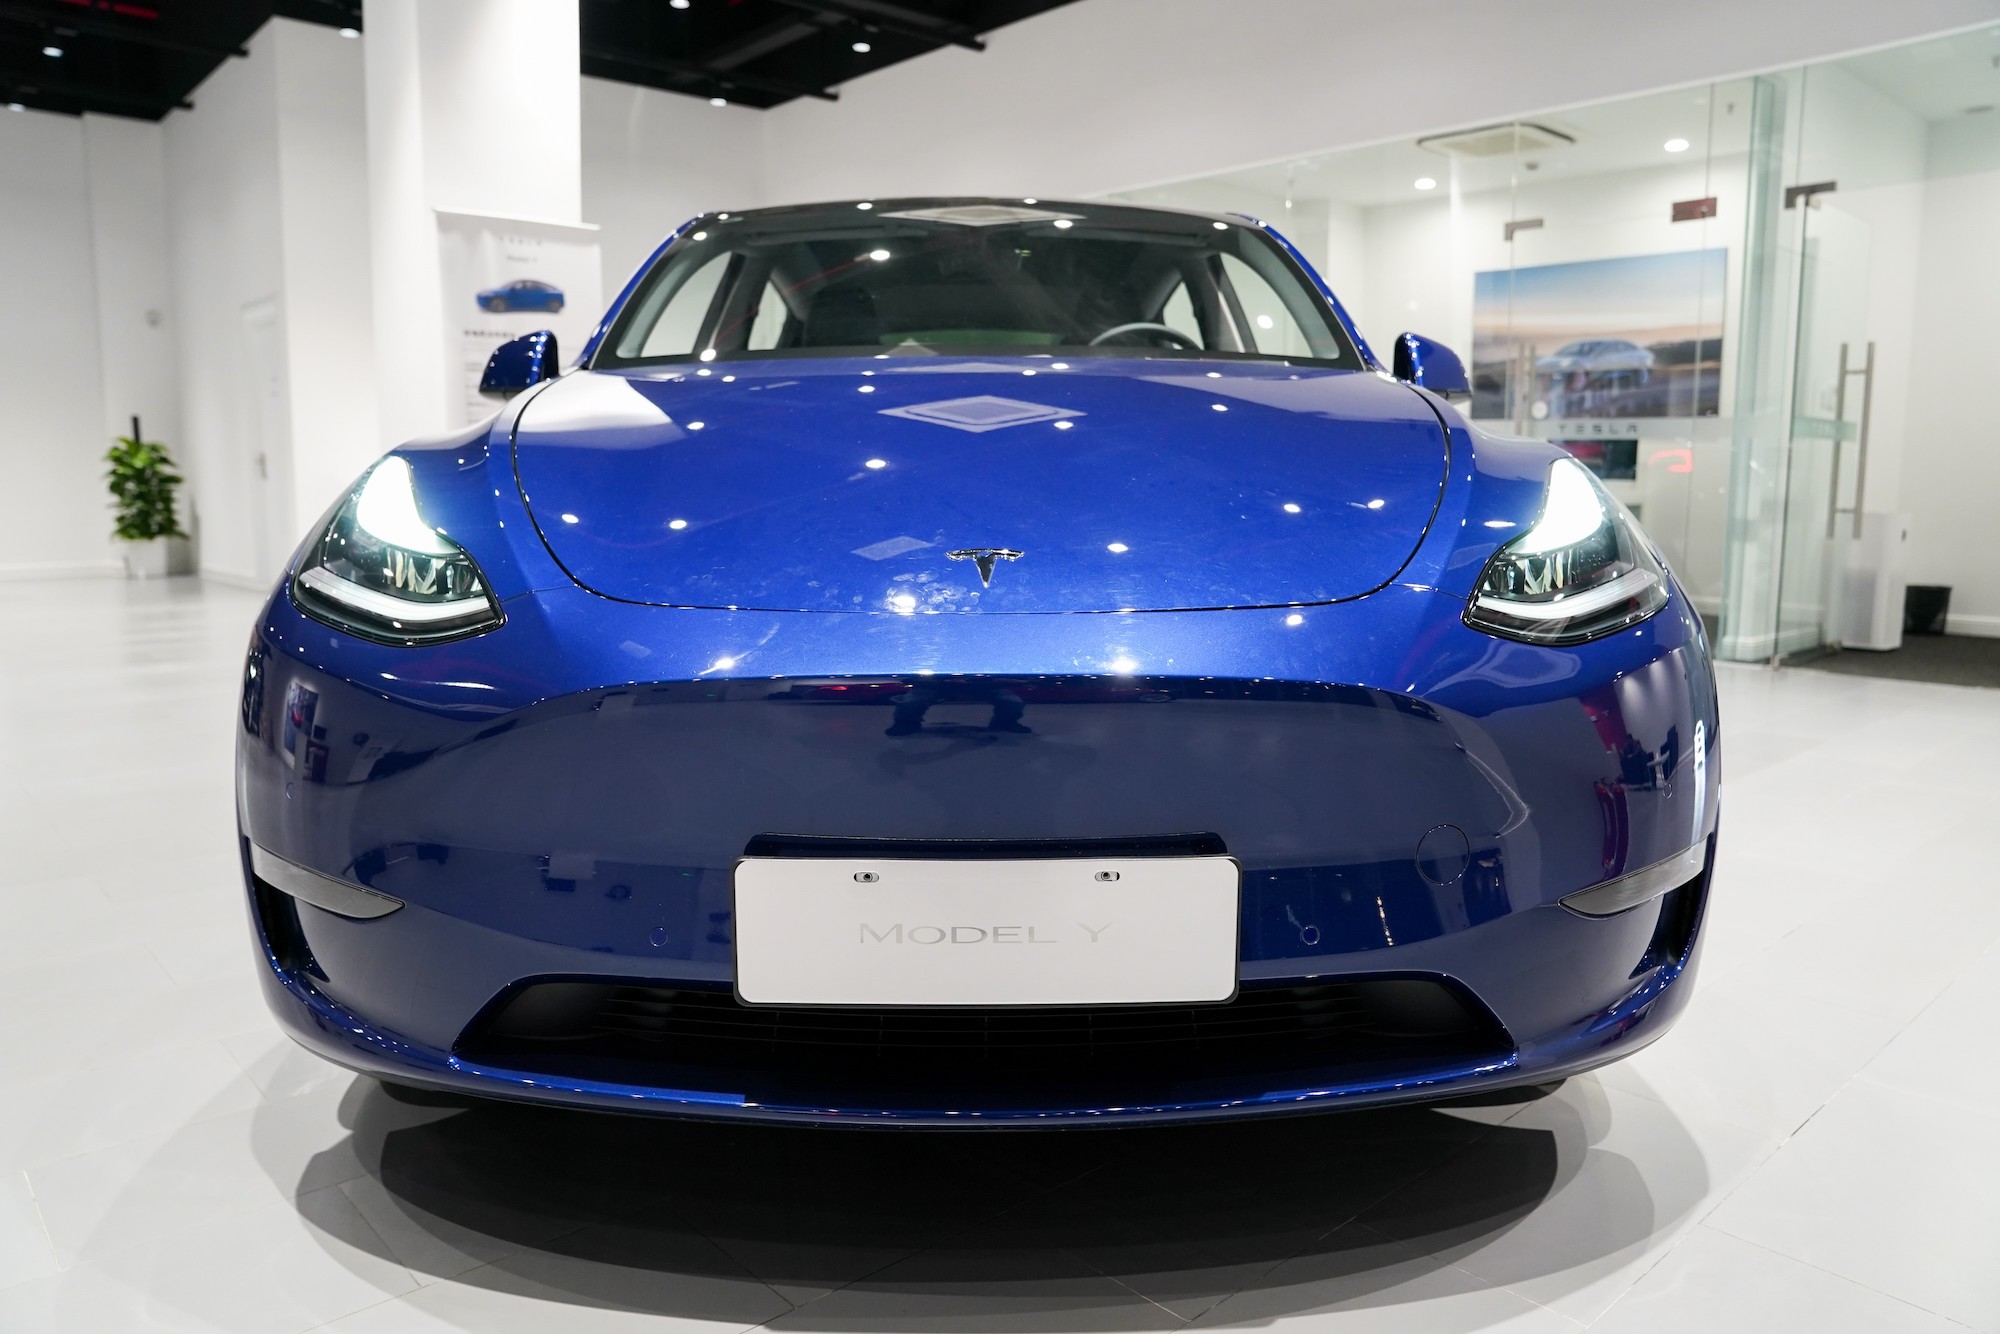 A blue Tesla Model Y vehicle is pictured at a Tesla Center in Shanghai on Jan 18, 2021